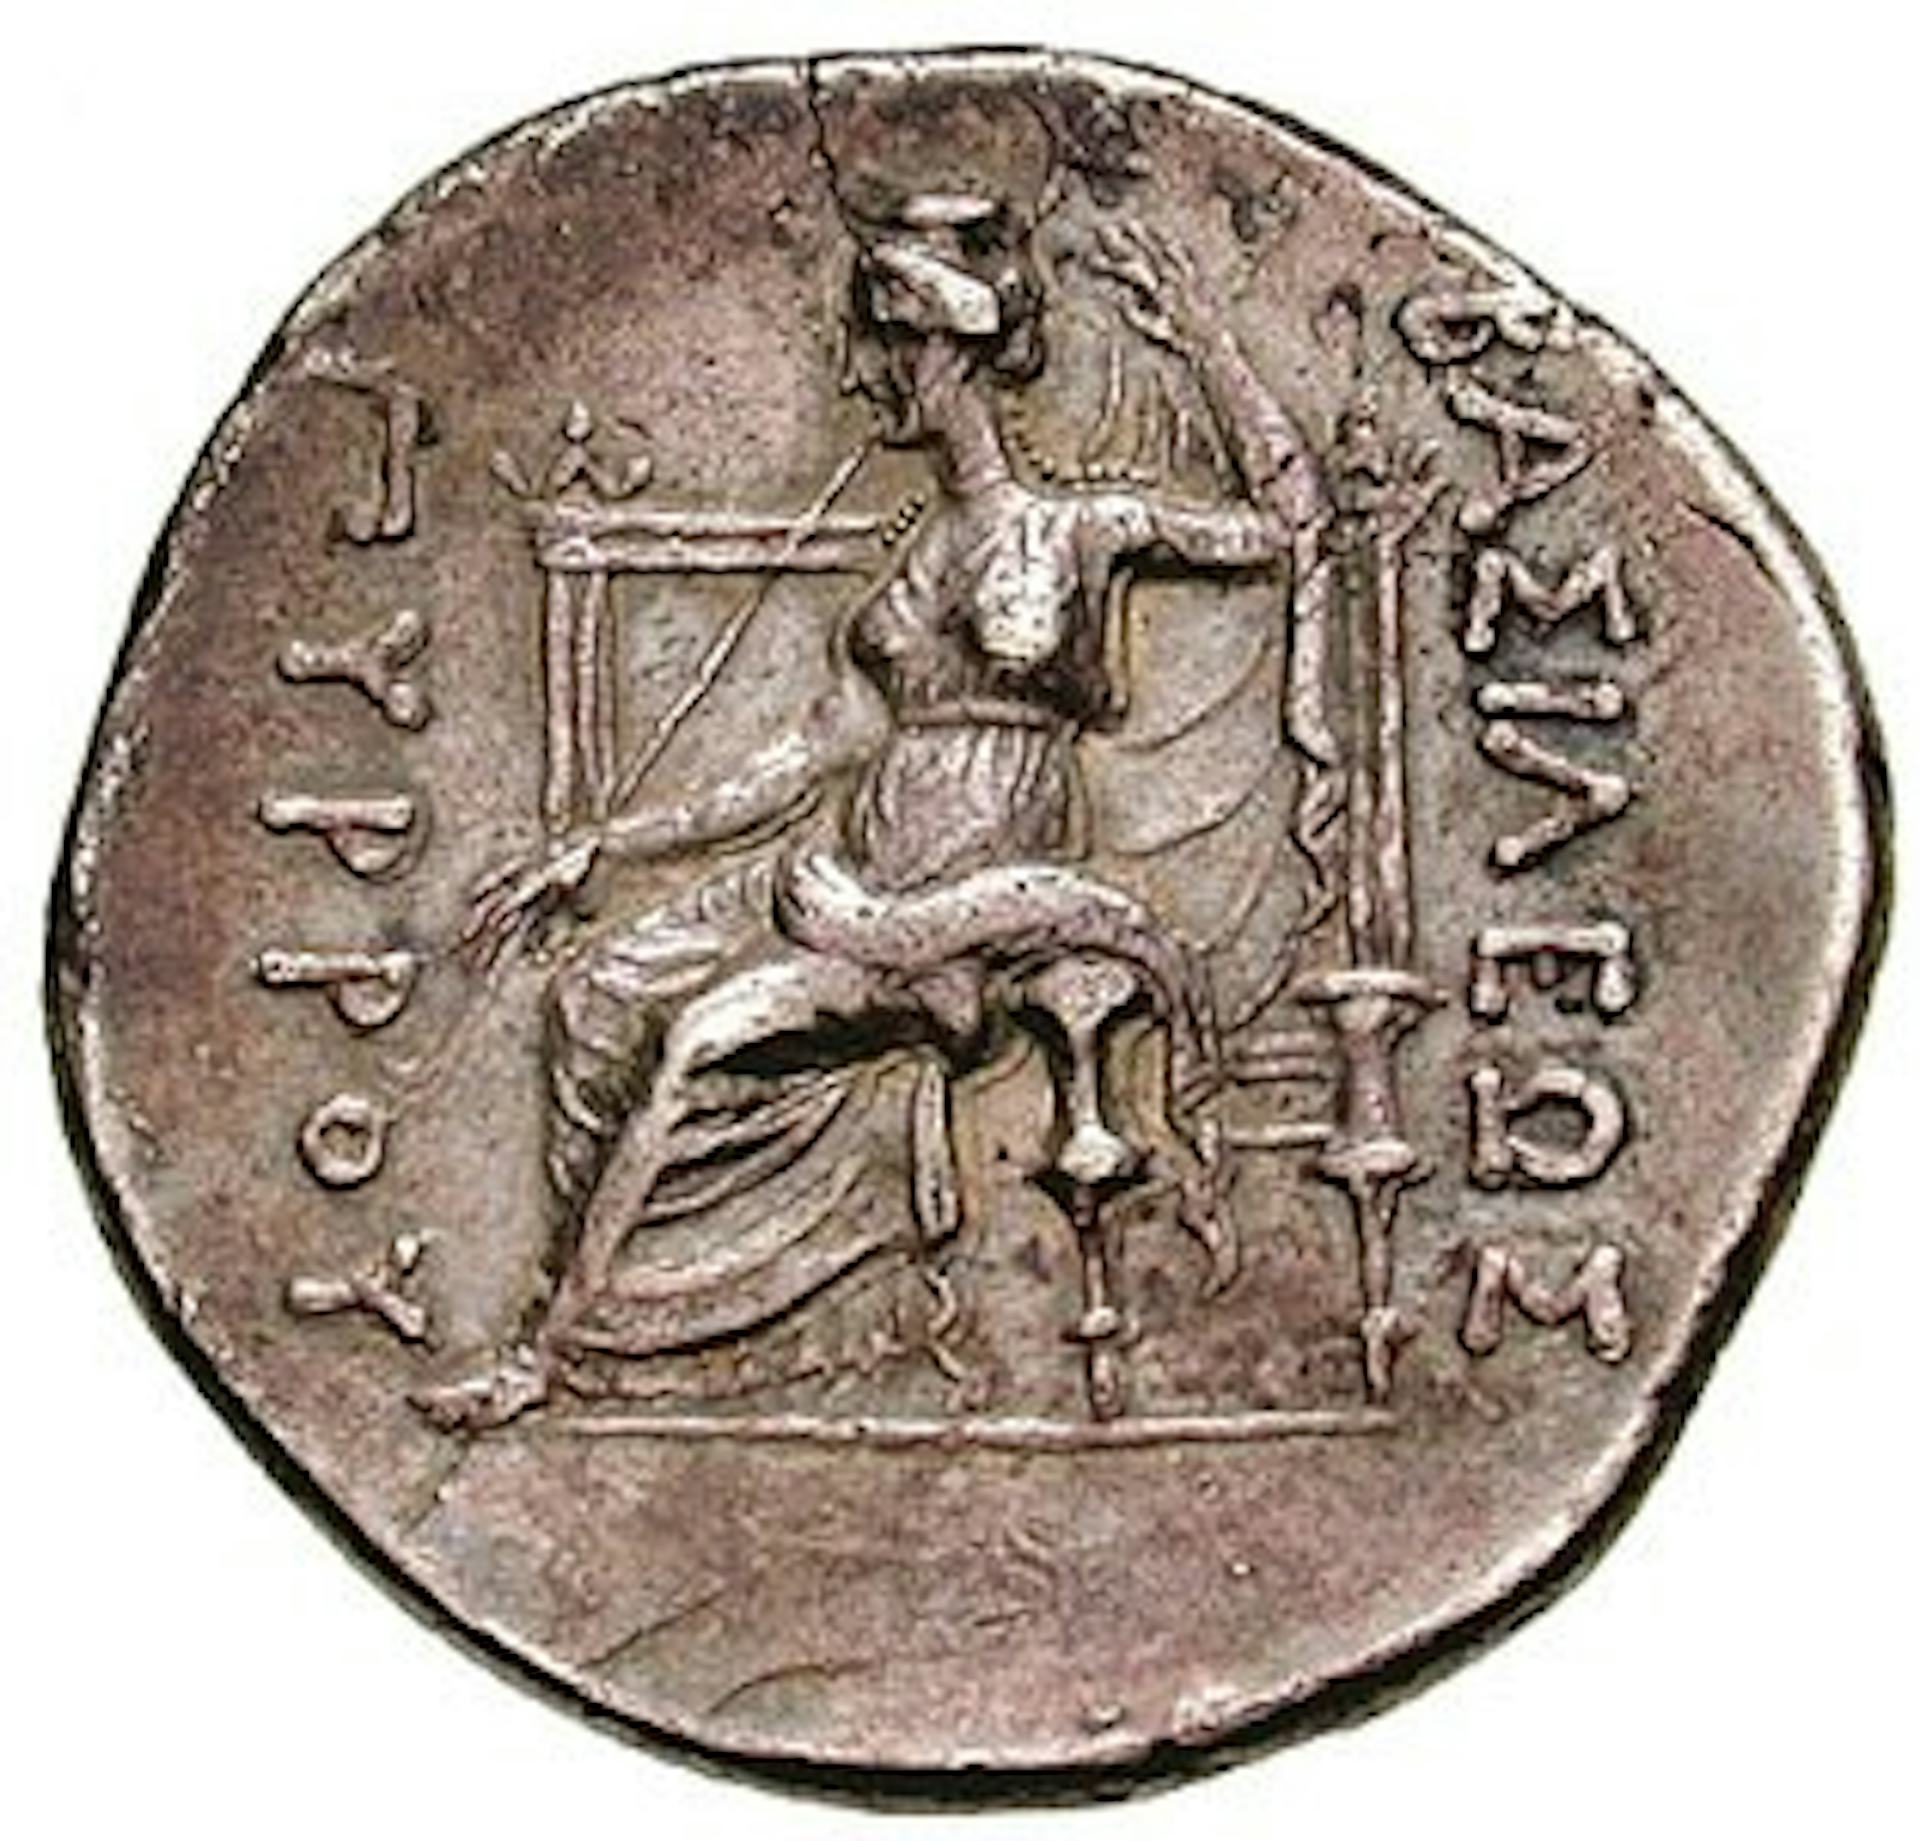 Reverse of coin showing Dione